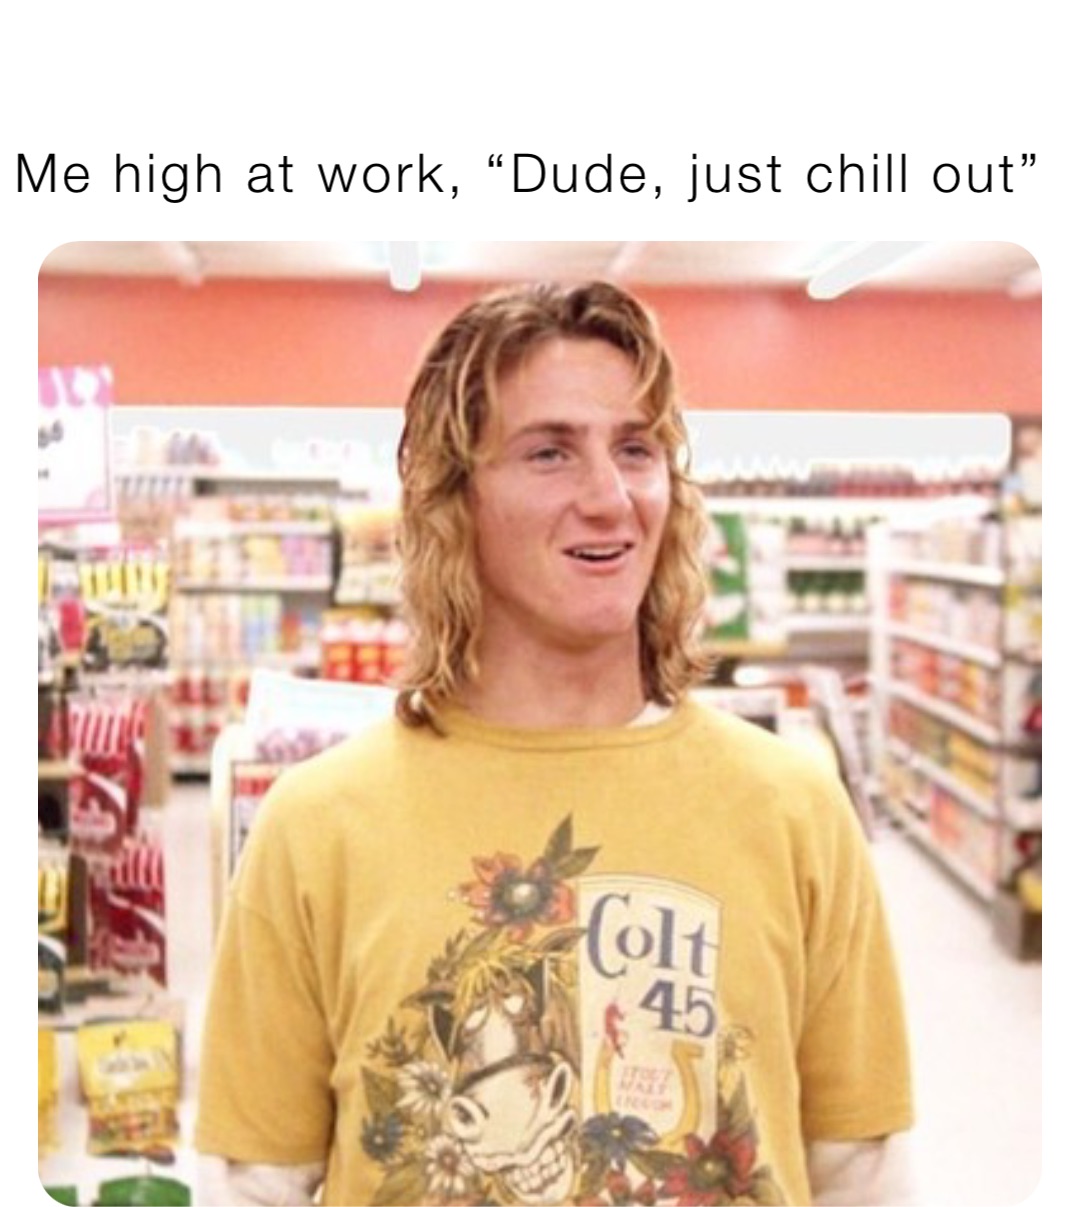 Me high at work, “Dude, just chill out”